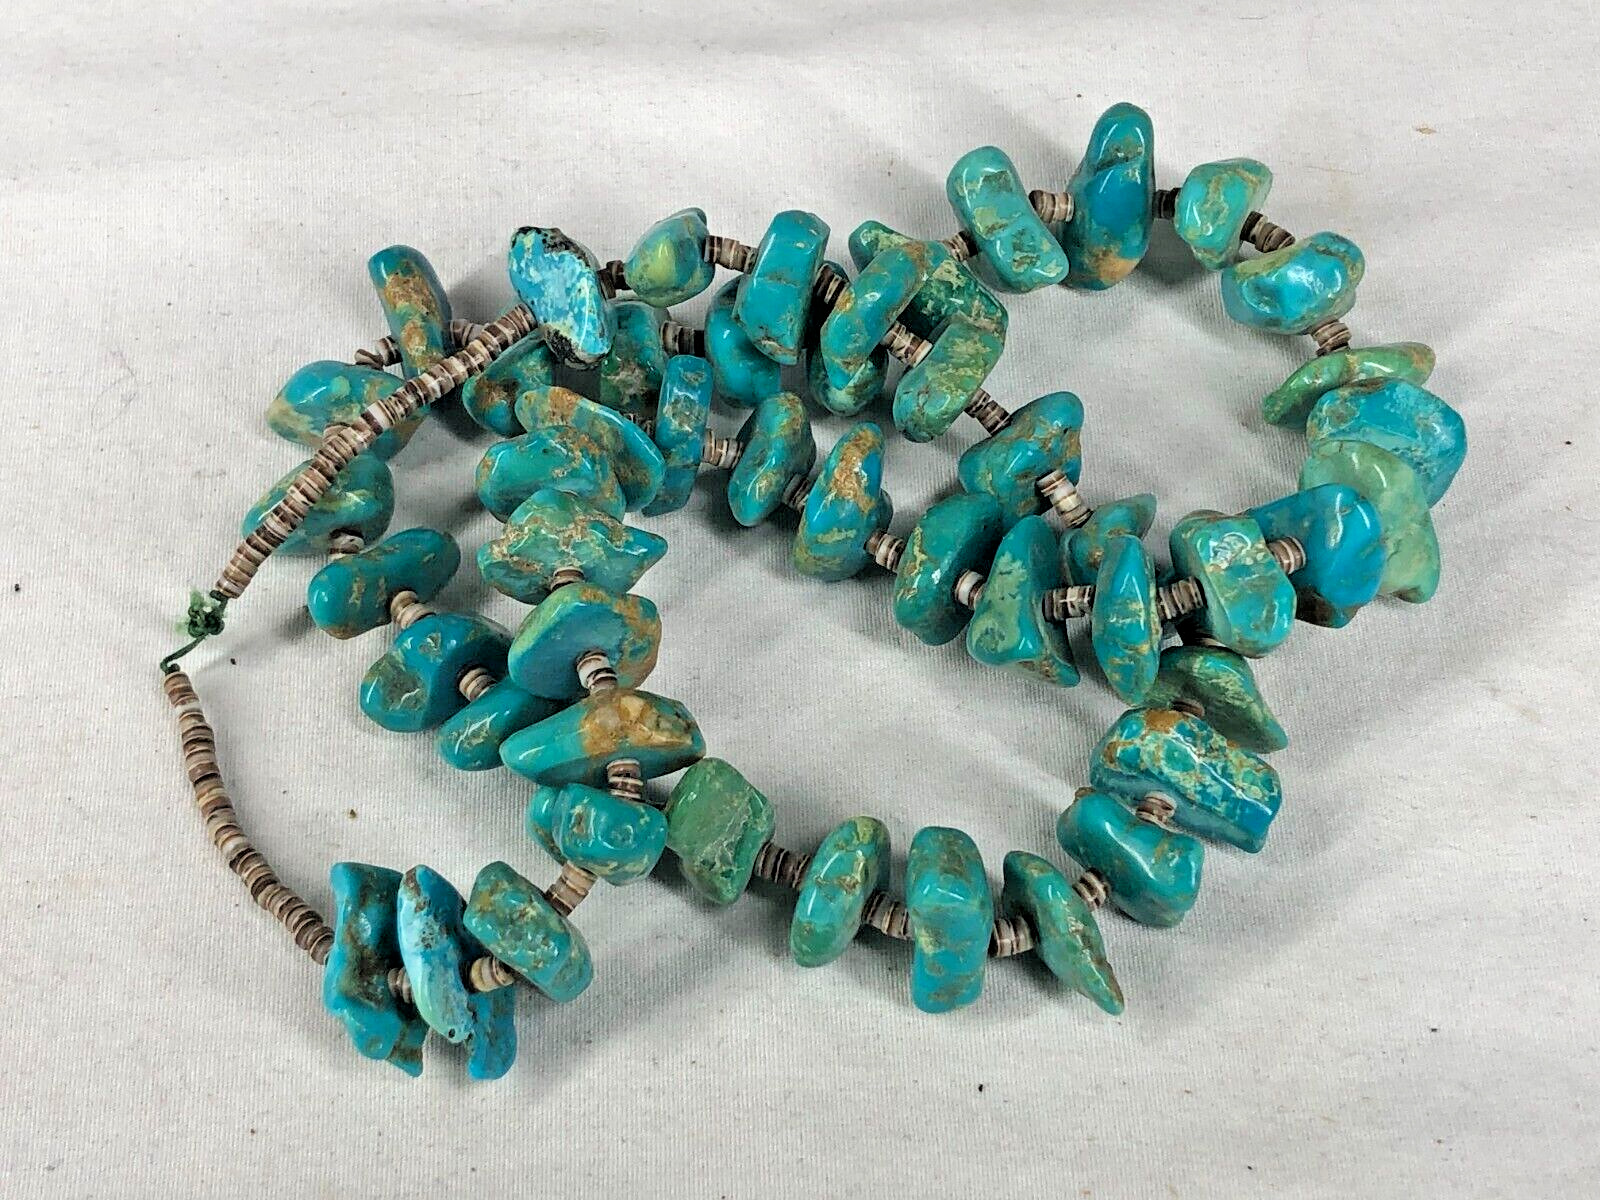 OLDER VINTAGE SANTO DOMINGO HEISHE AND TURQUOISE NECKLACE